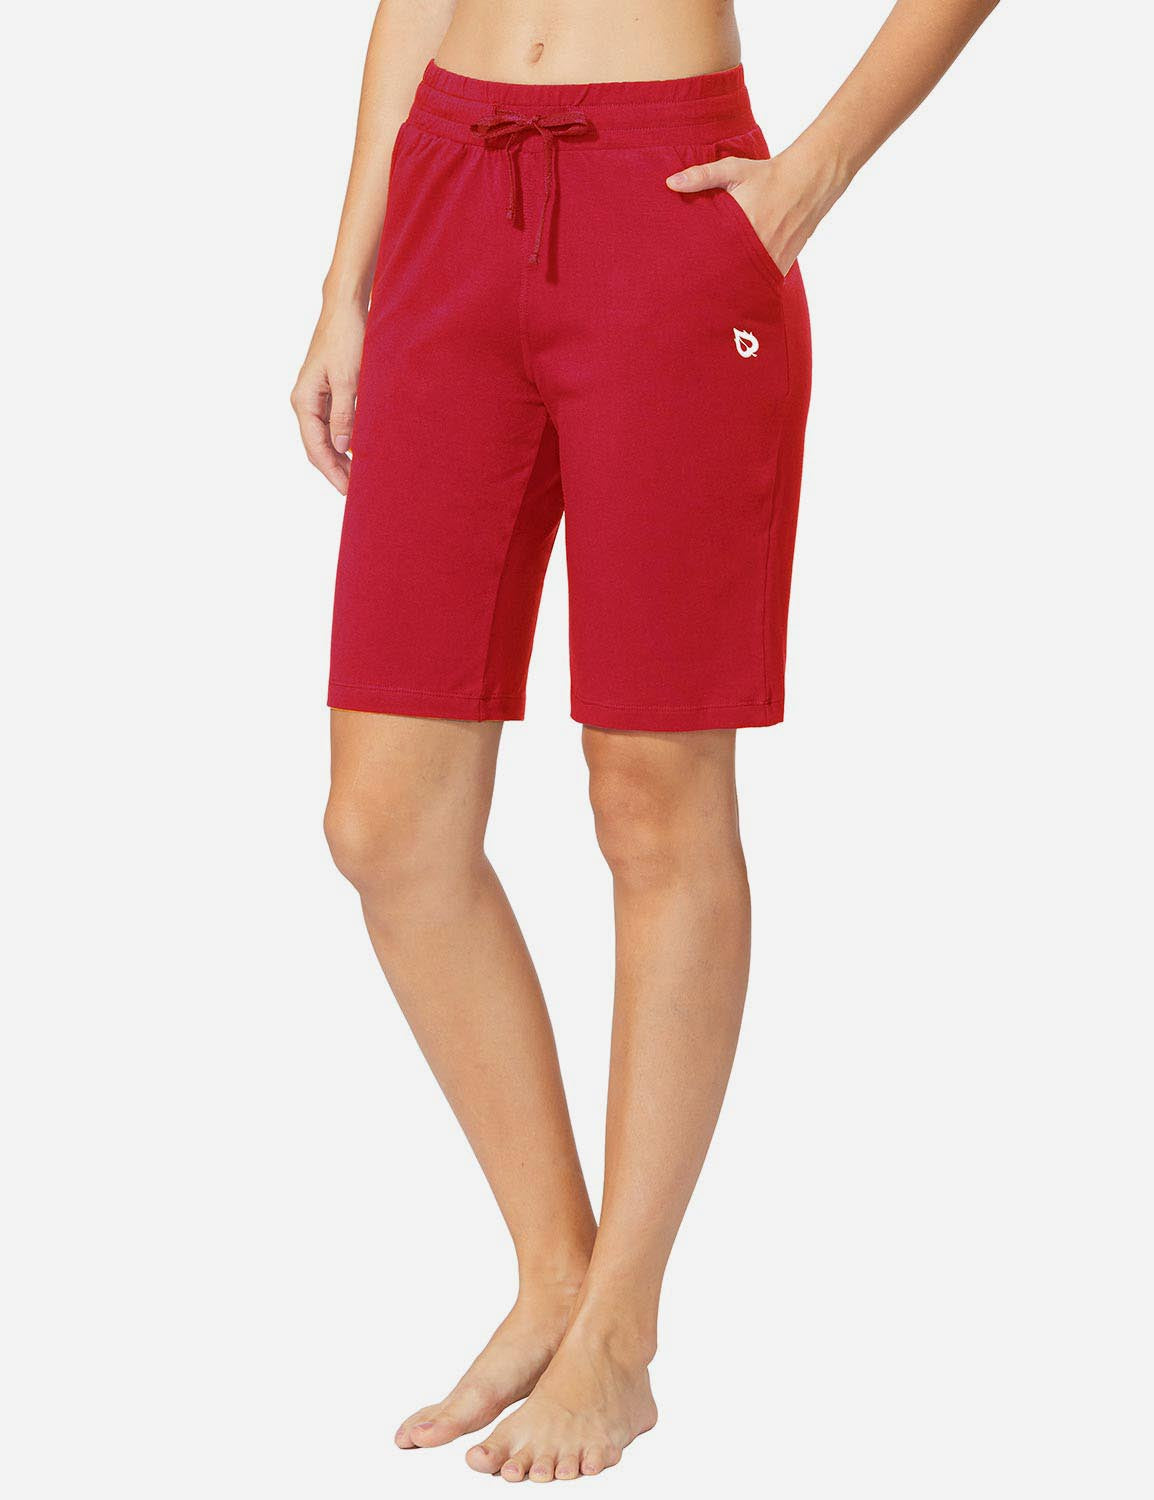 Baleaf Women's Mid-Rise Cotton Pocketed Bermuda Shorts abh104 Rose Red Front